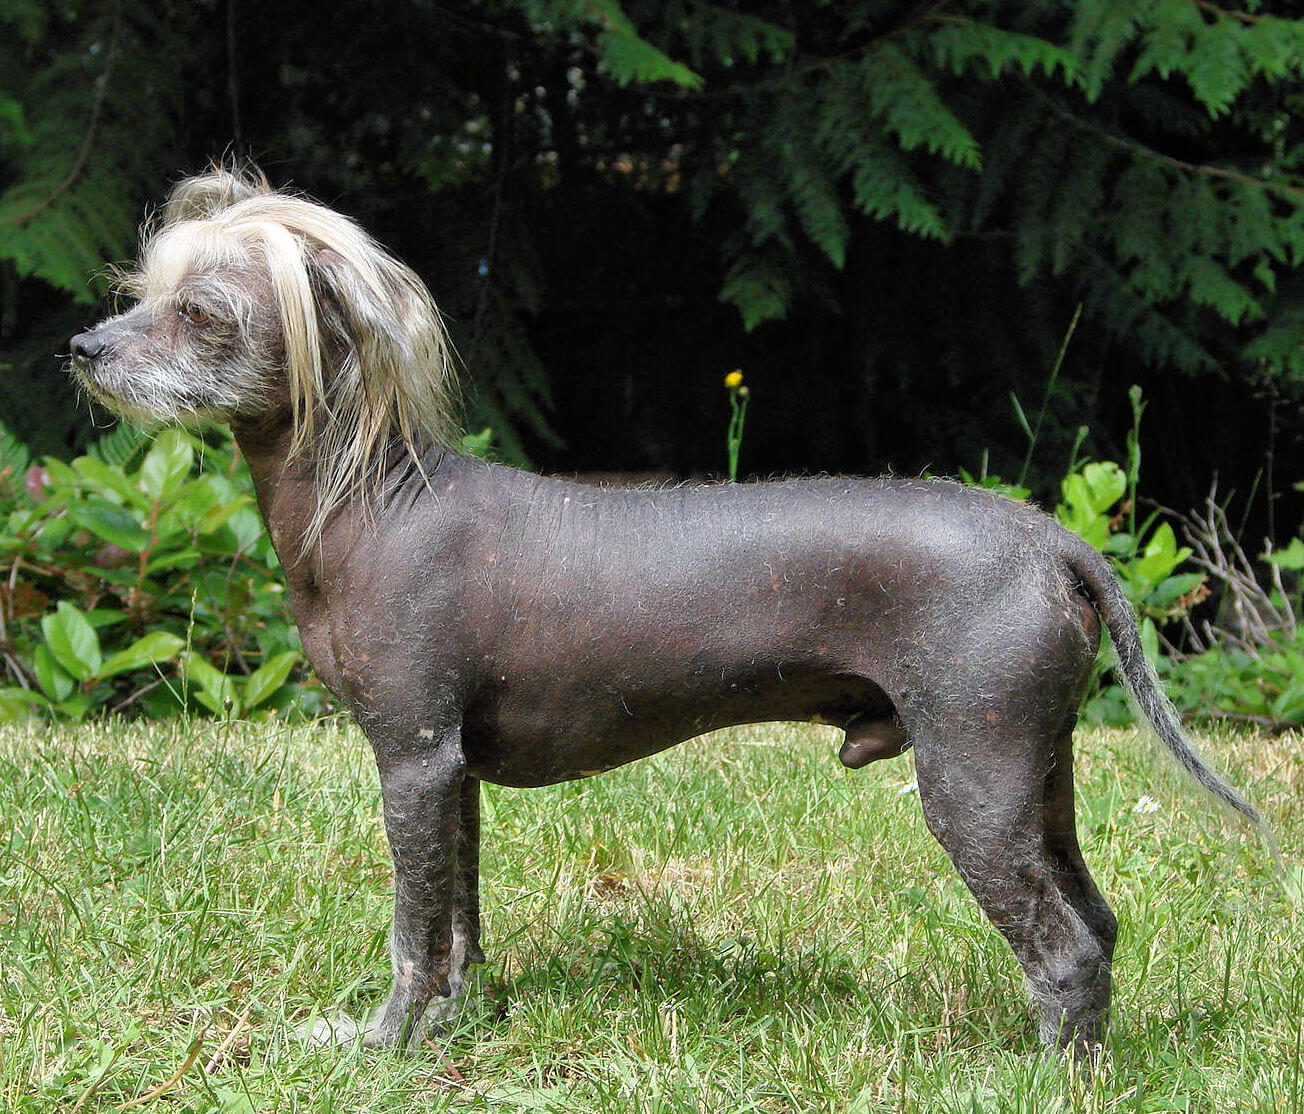 Chó Chinese Crested